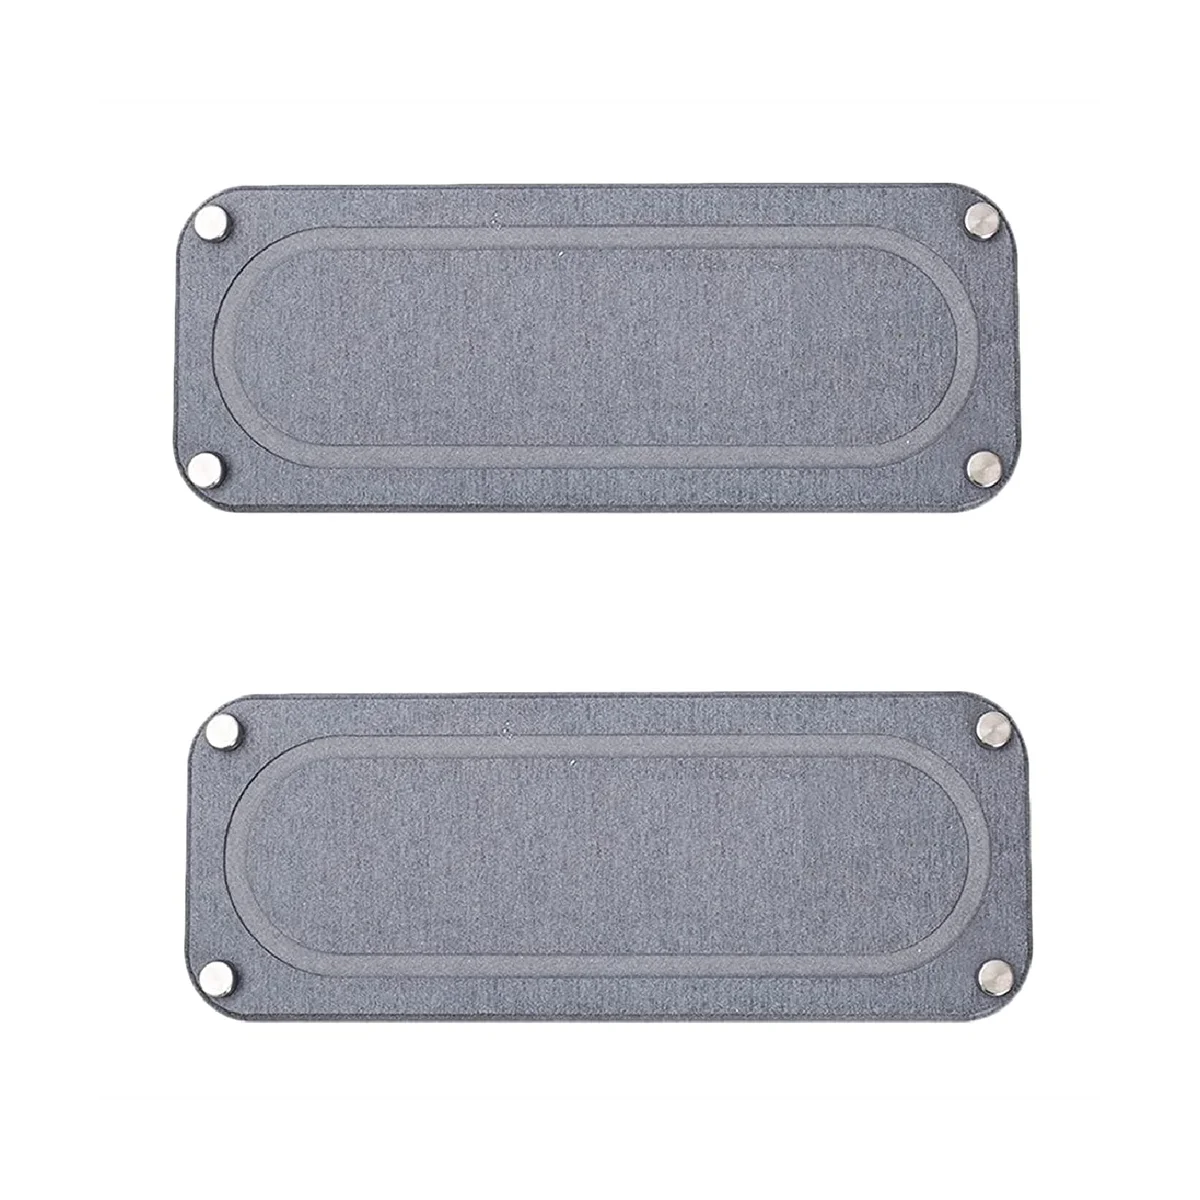 

Large Sink Caddy Instant Dry Kitchen Sink Organizer 2 Pack,Diatomaceous Earth Stone Sink Tray